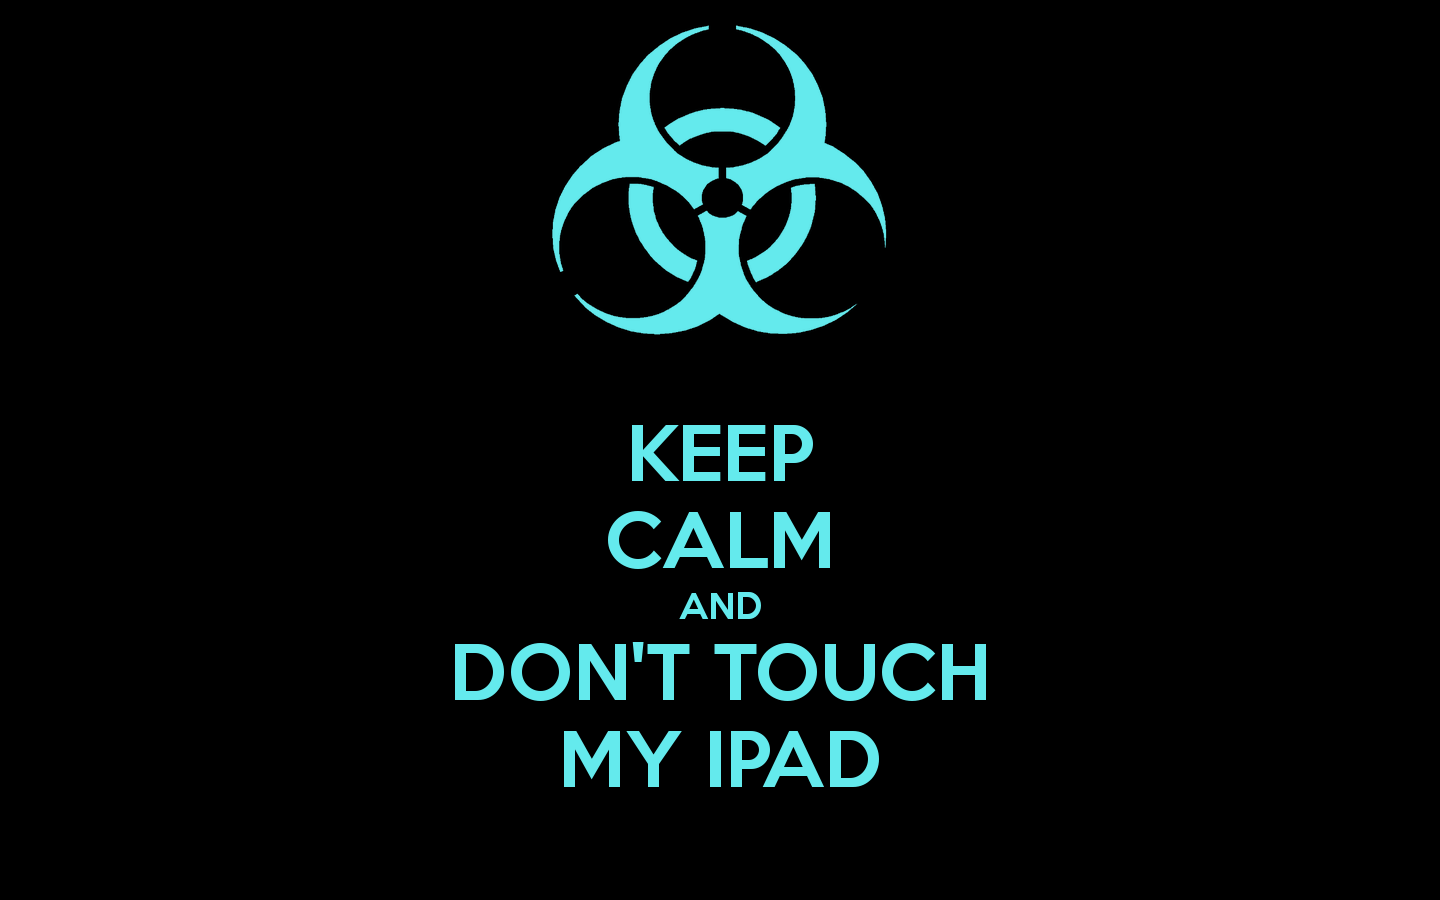 Обои don't Touch. Don't Touch my Phone обои. Обои don't Touch my IPAD. Фото don't Touch my Phone.